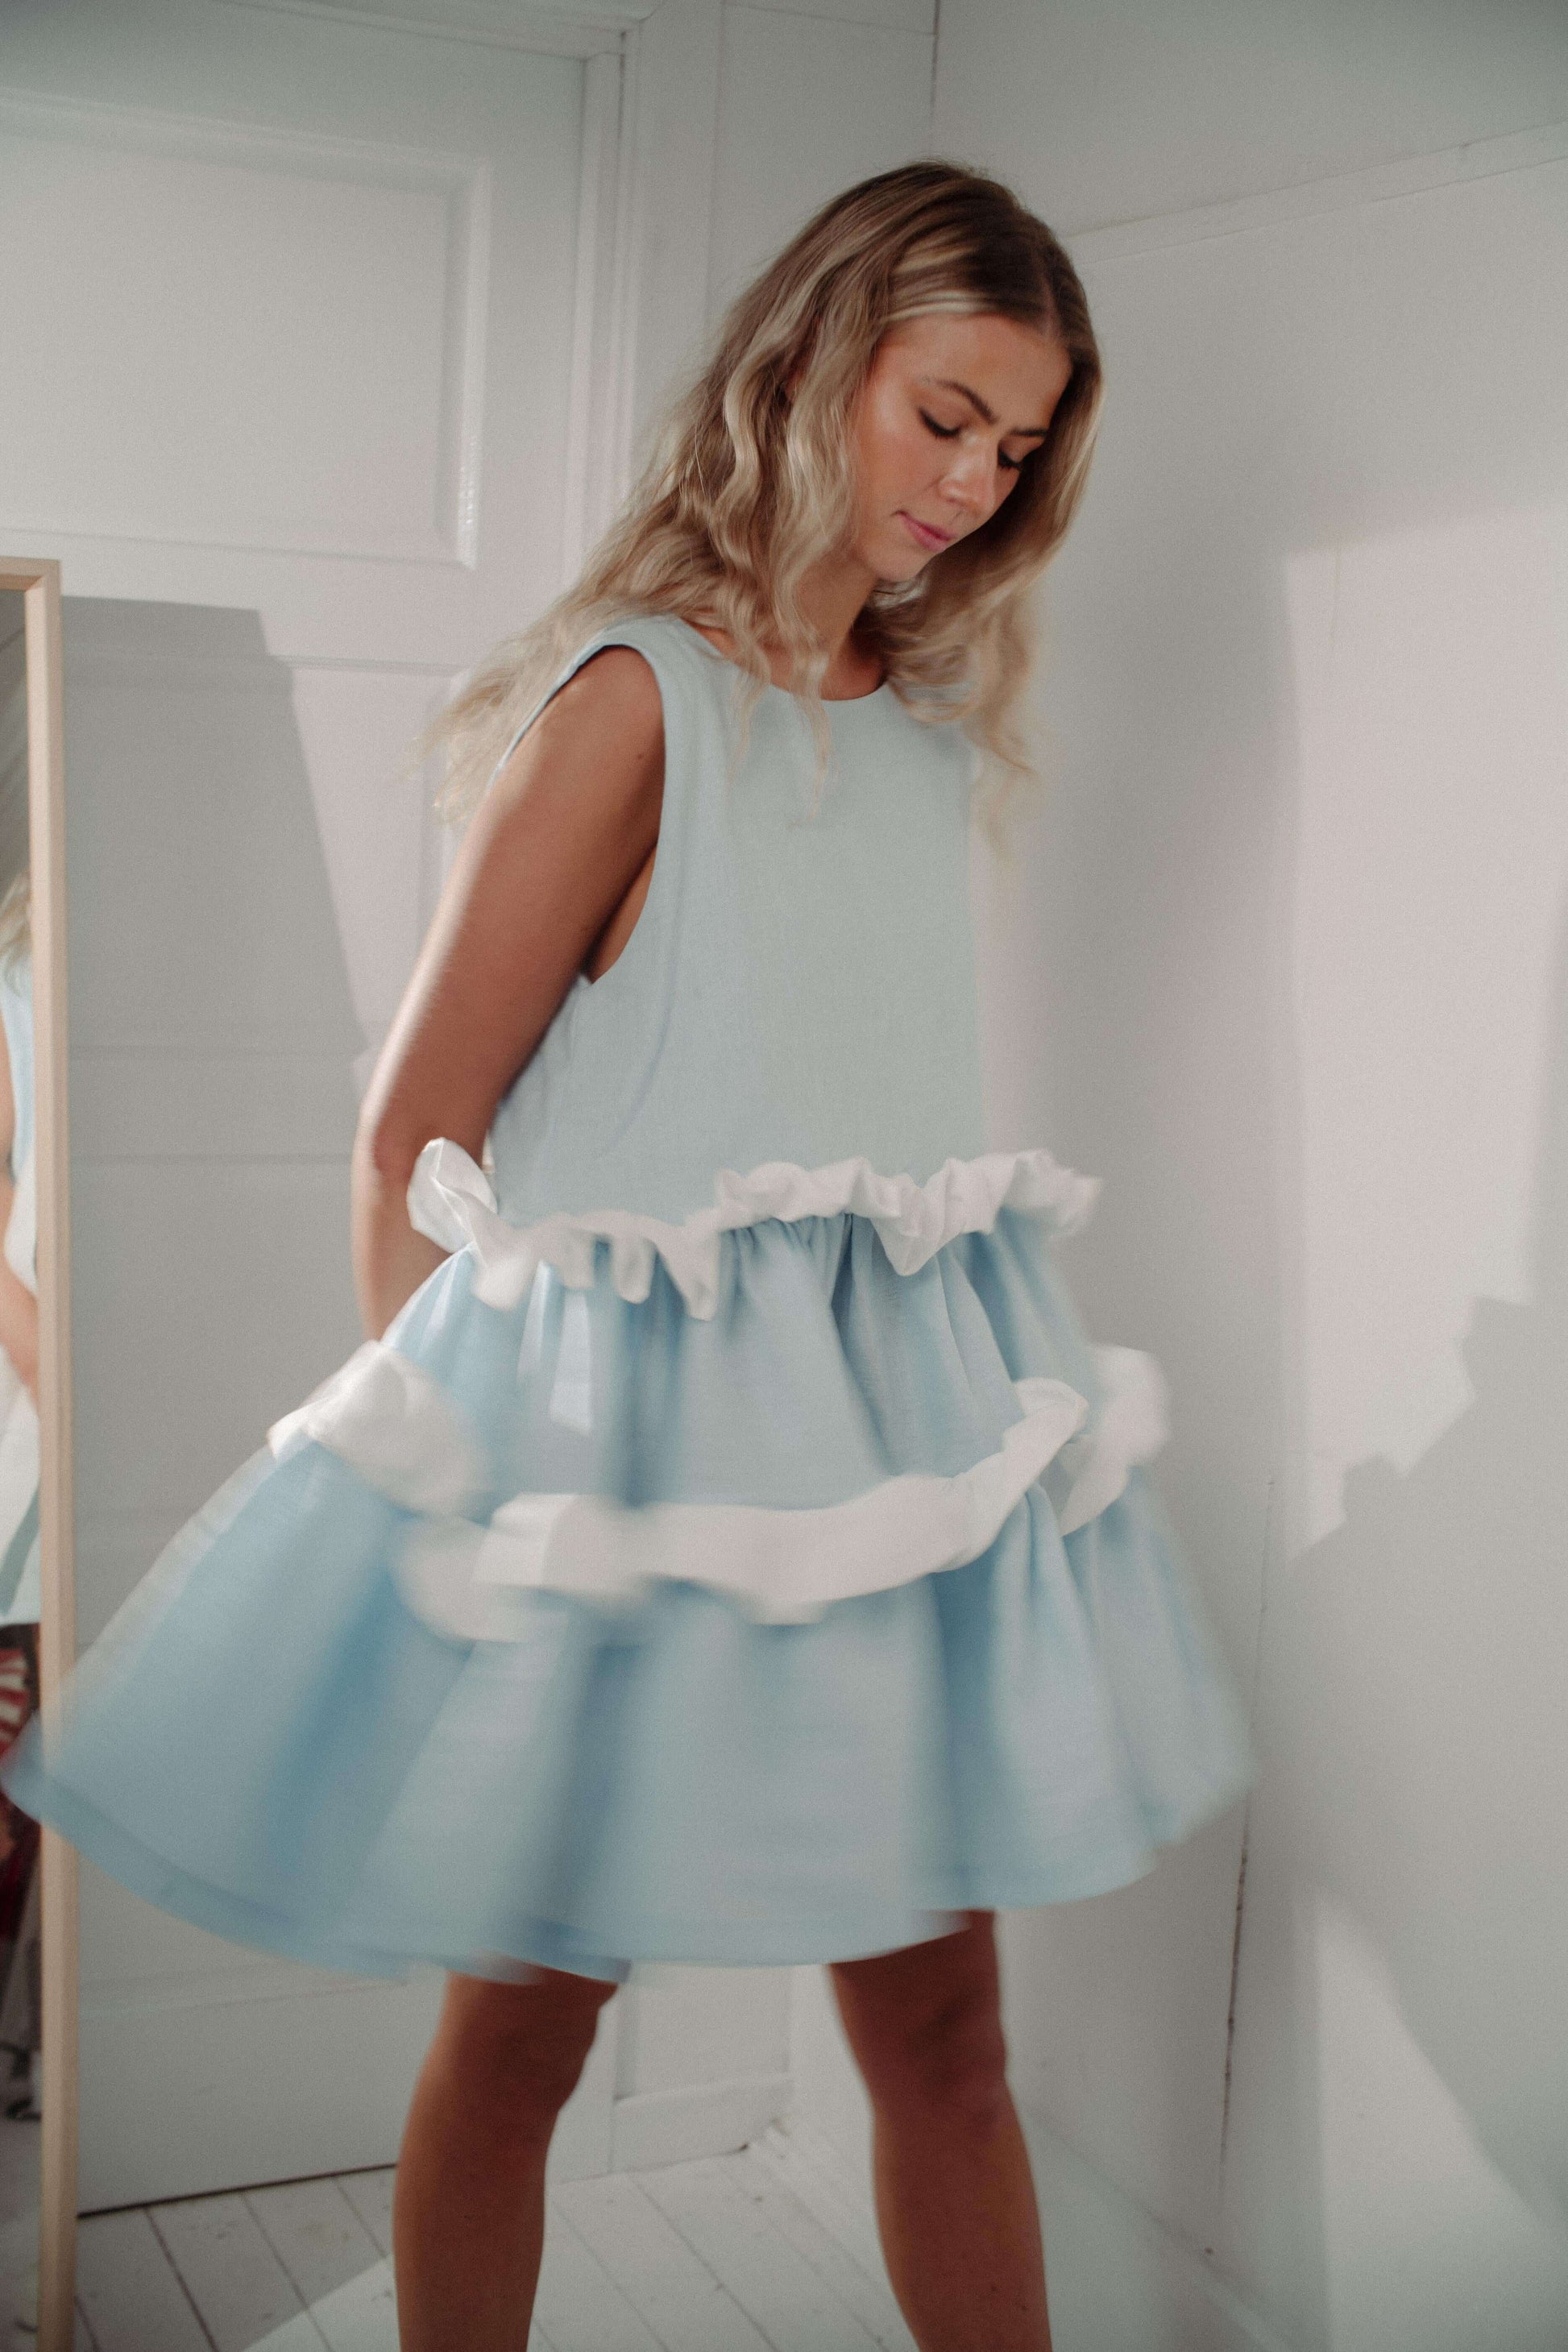 'HEAD IN THE CLOUDS' DRESS | Introducing our most fun piece yet- the 'Head In The Clouds' dress will make you feel like you're floating above the real world. Created with a soft pastel blue linen and contrasting white frill, the dress feels nostalgic and